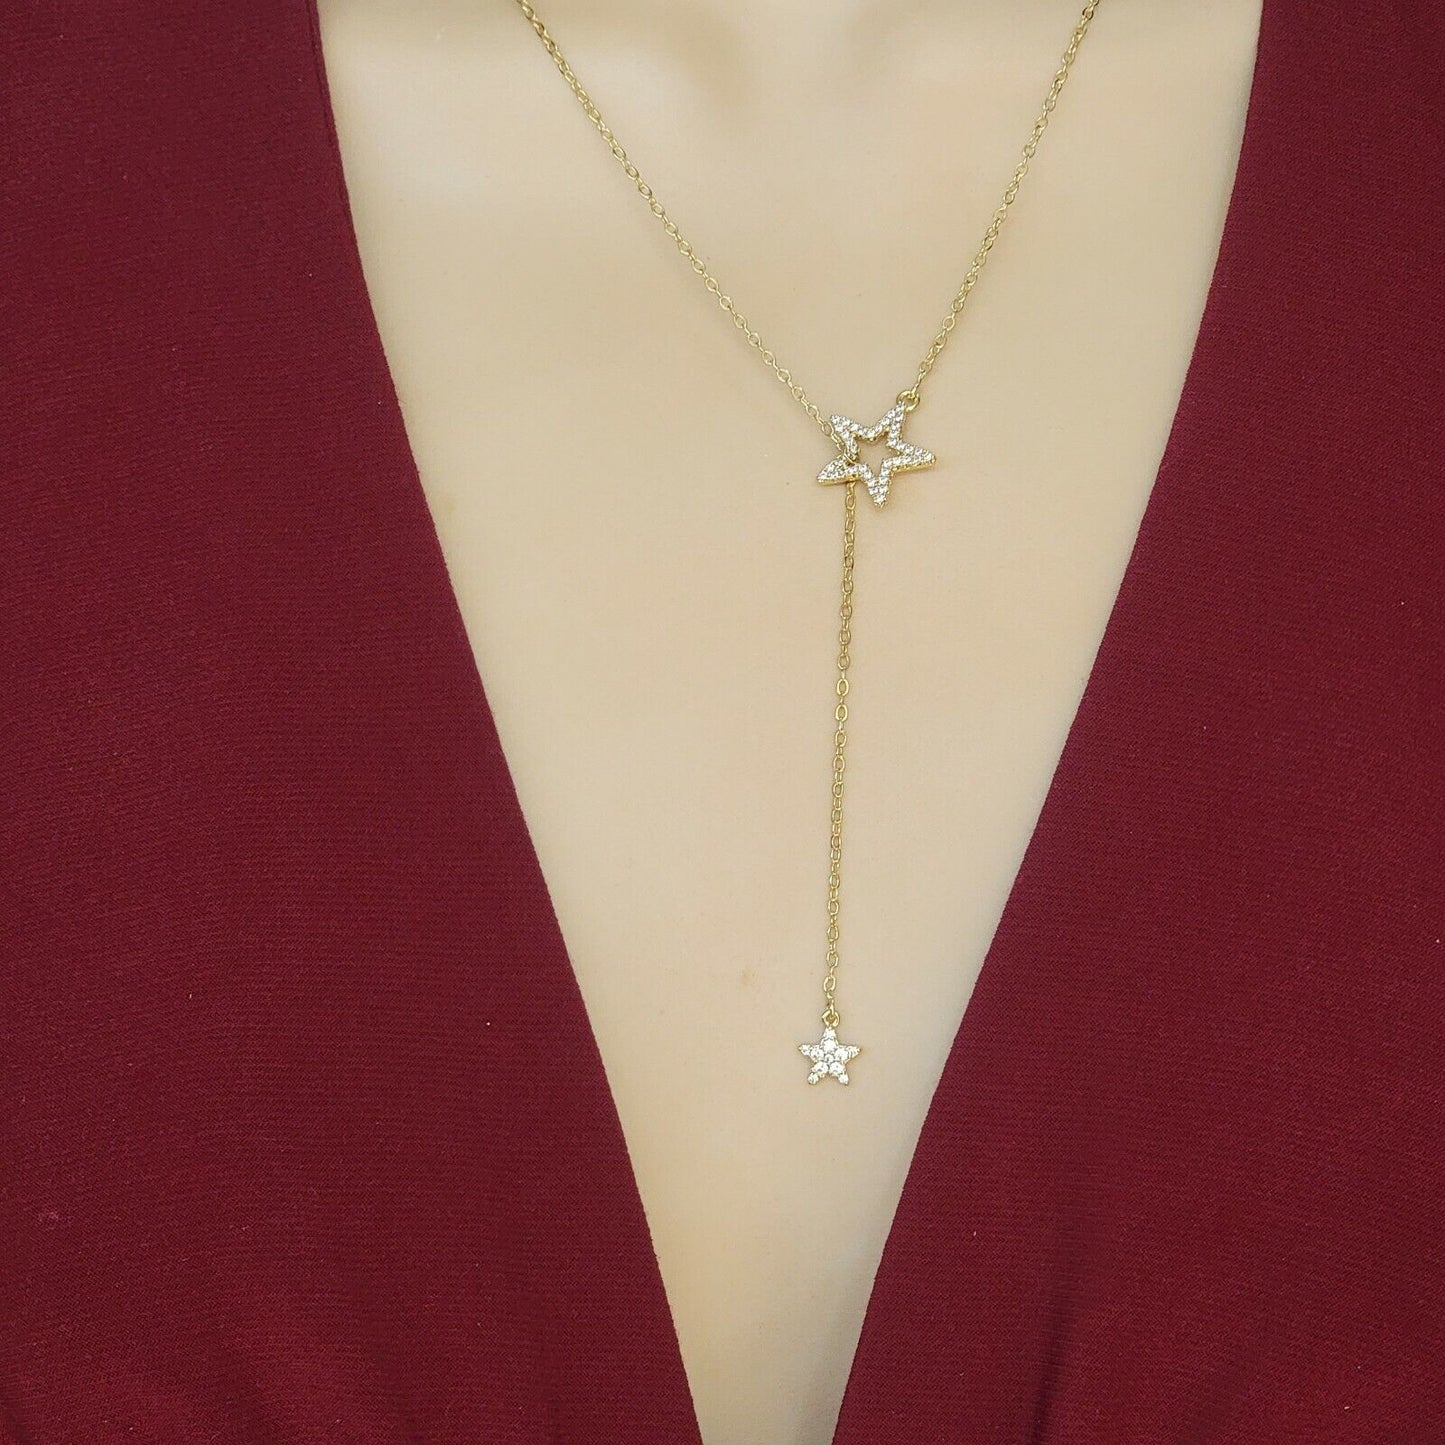 Necklaces - 14K Gold Plated. Double CZ STAR Pull Through Y Adjustable Necklace